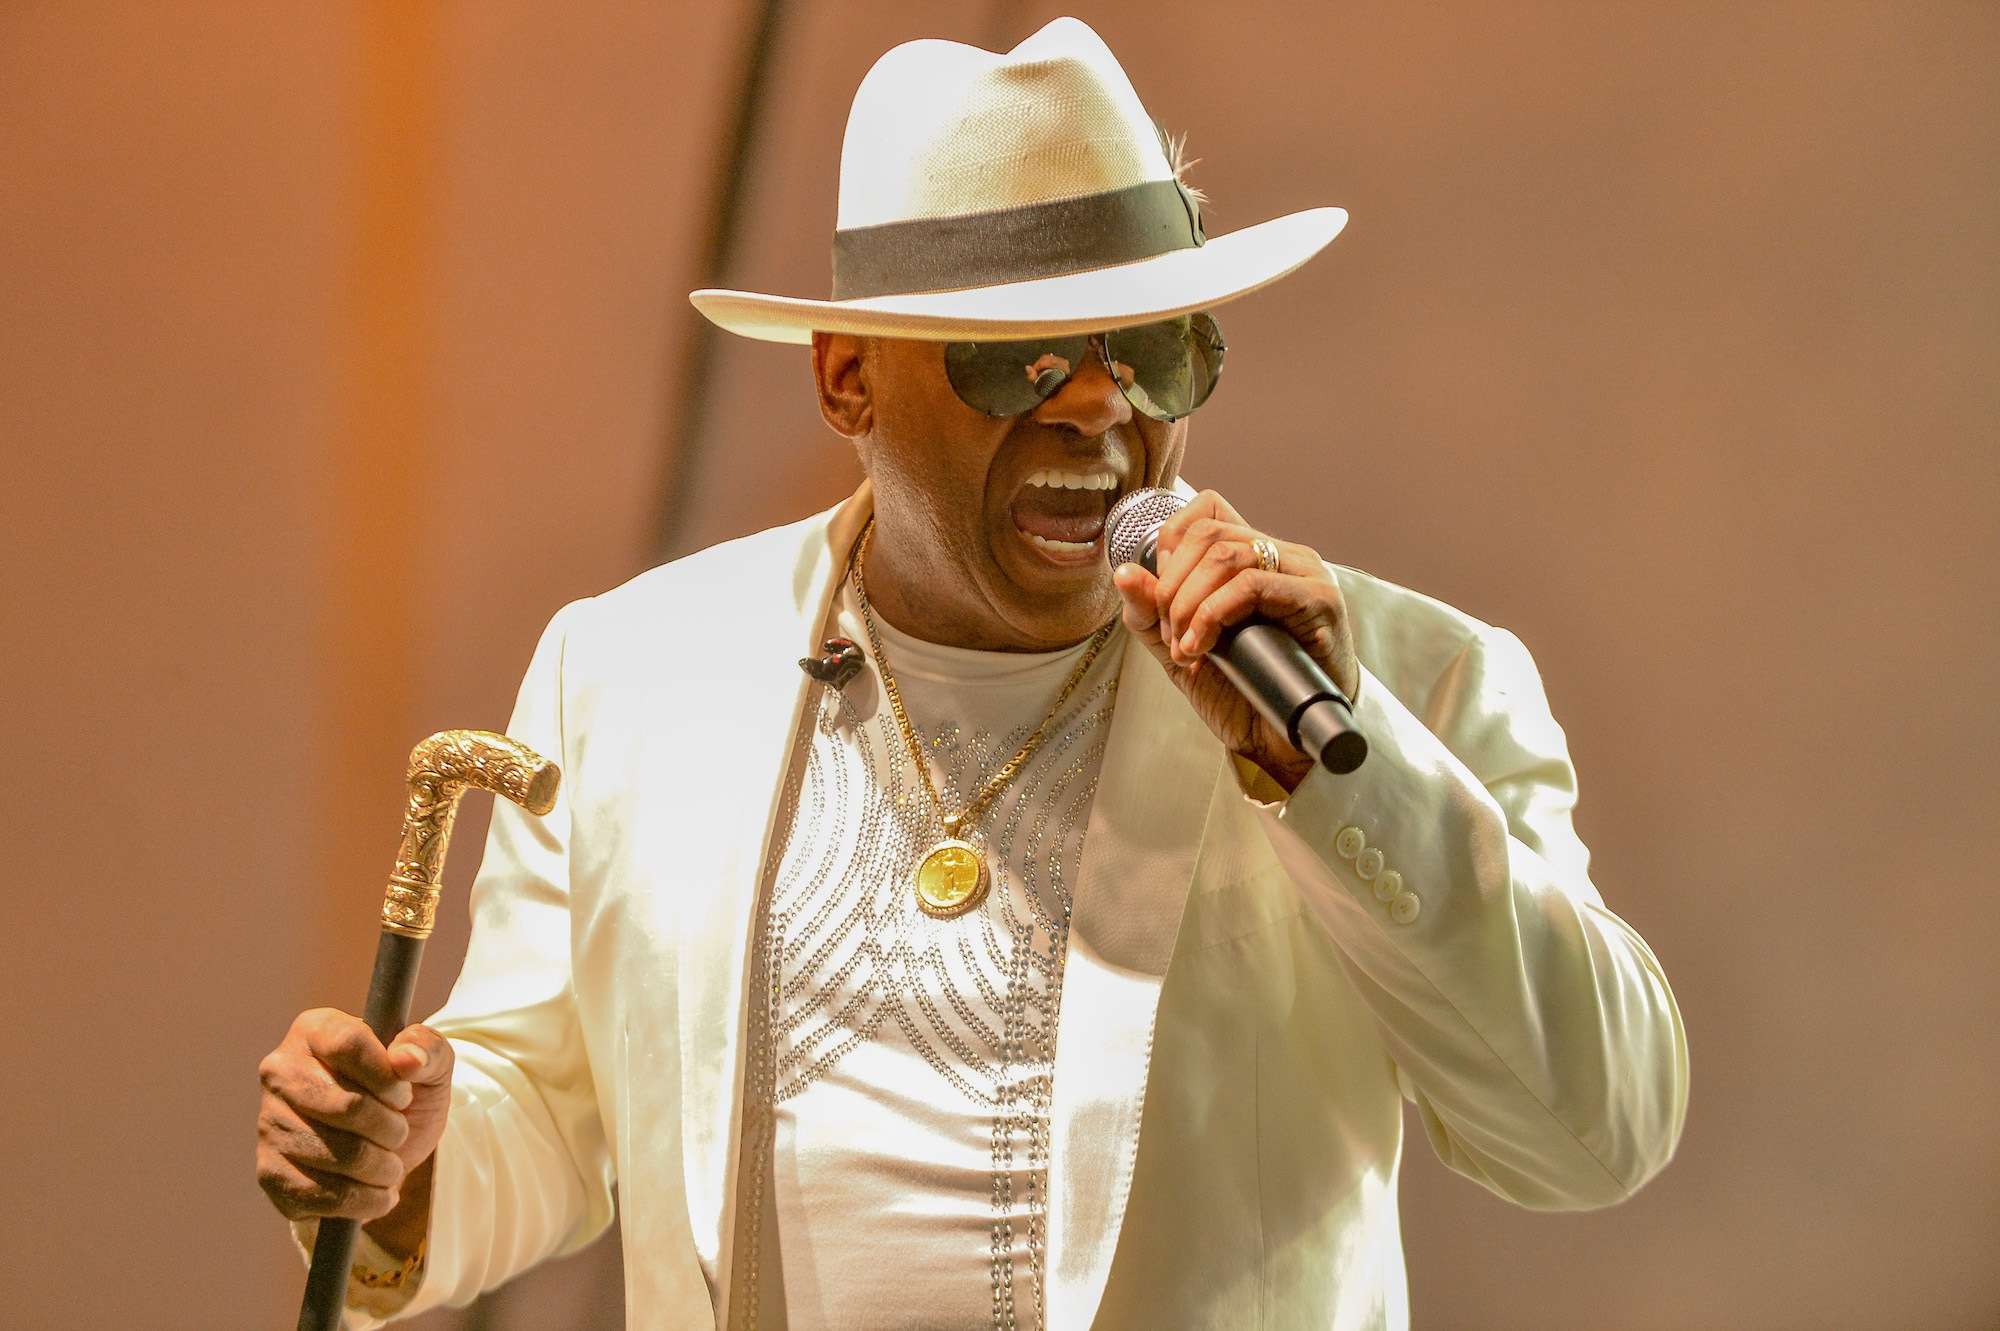 The Isley Brothers Live at Pitchfork [GALLERY] 5